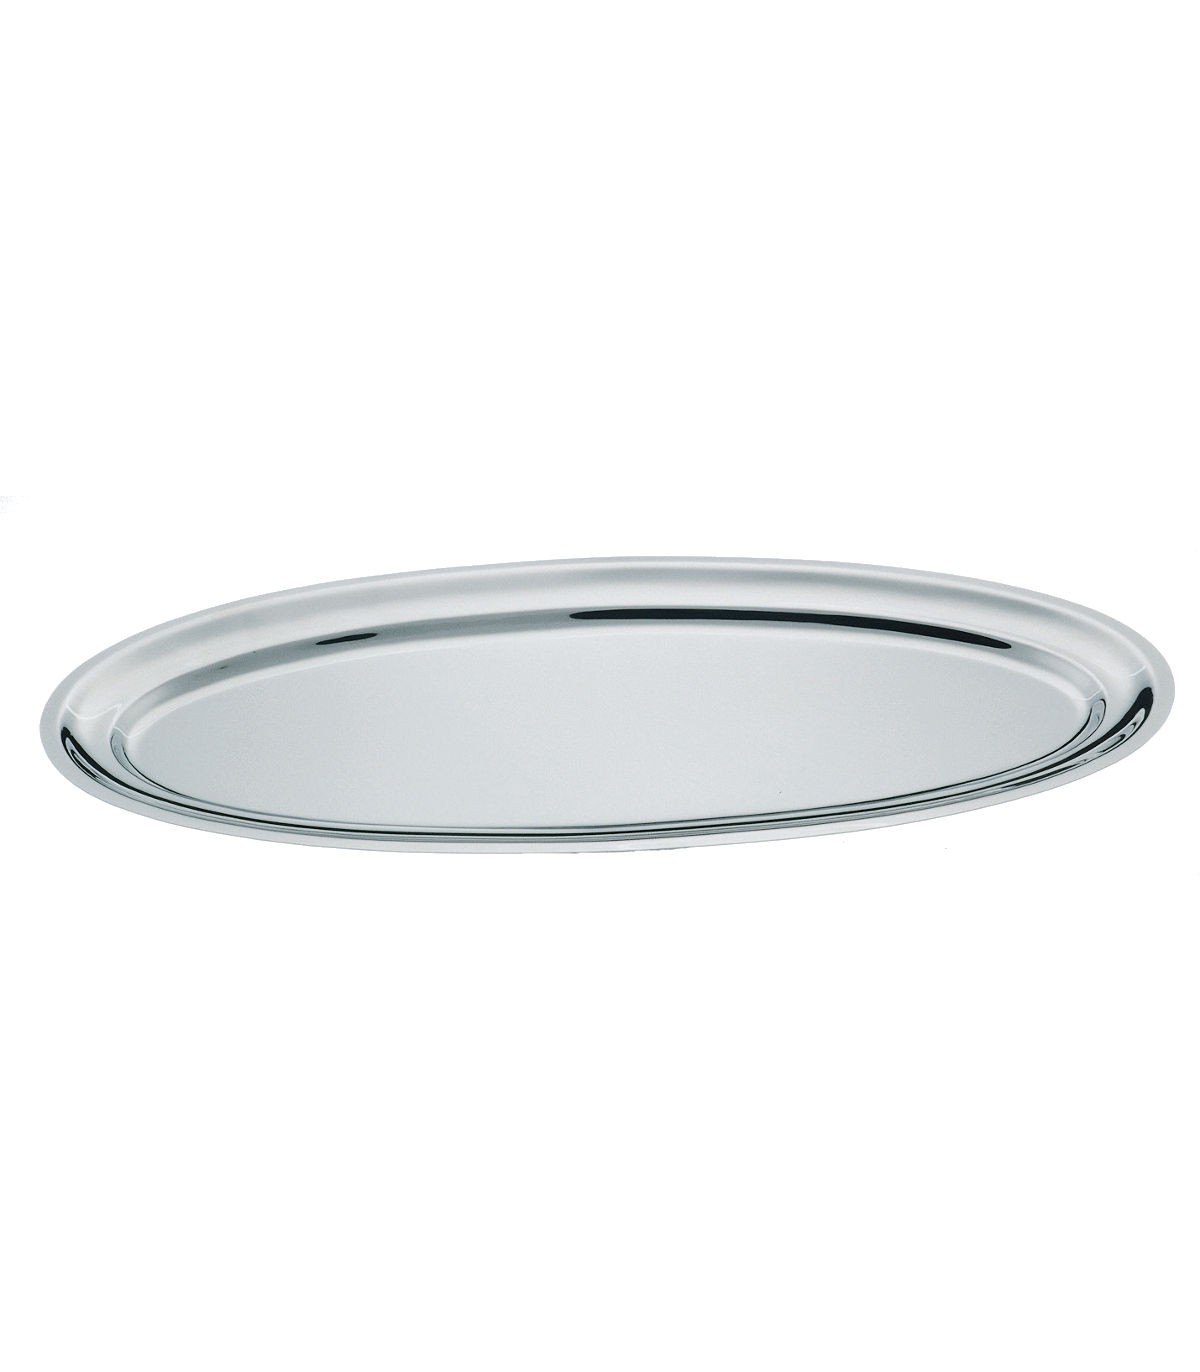 New Stainless Steel Oval Extra Small Platter Nuvo Accents Stainless Steel 